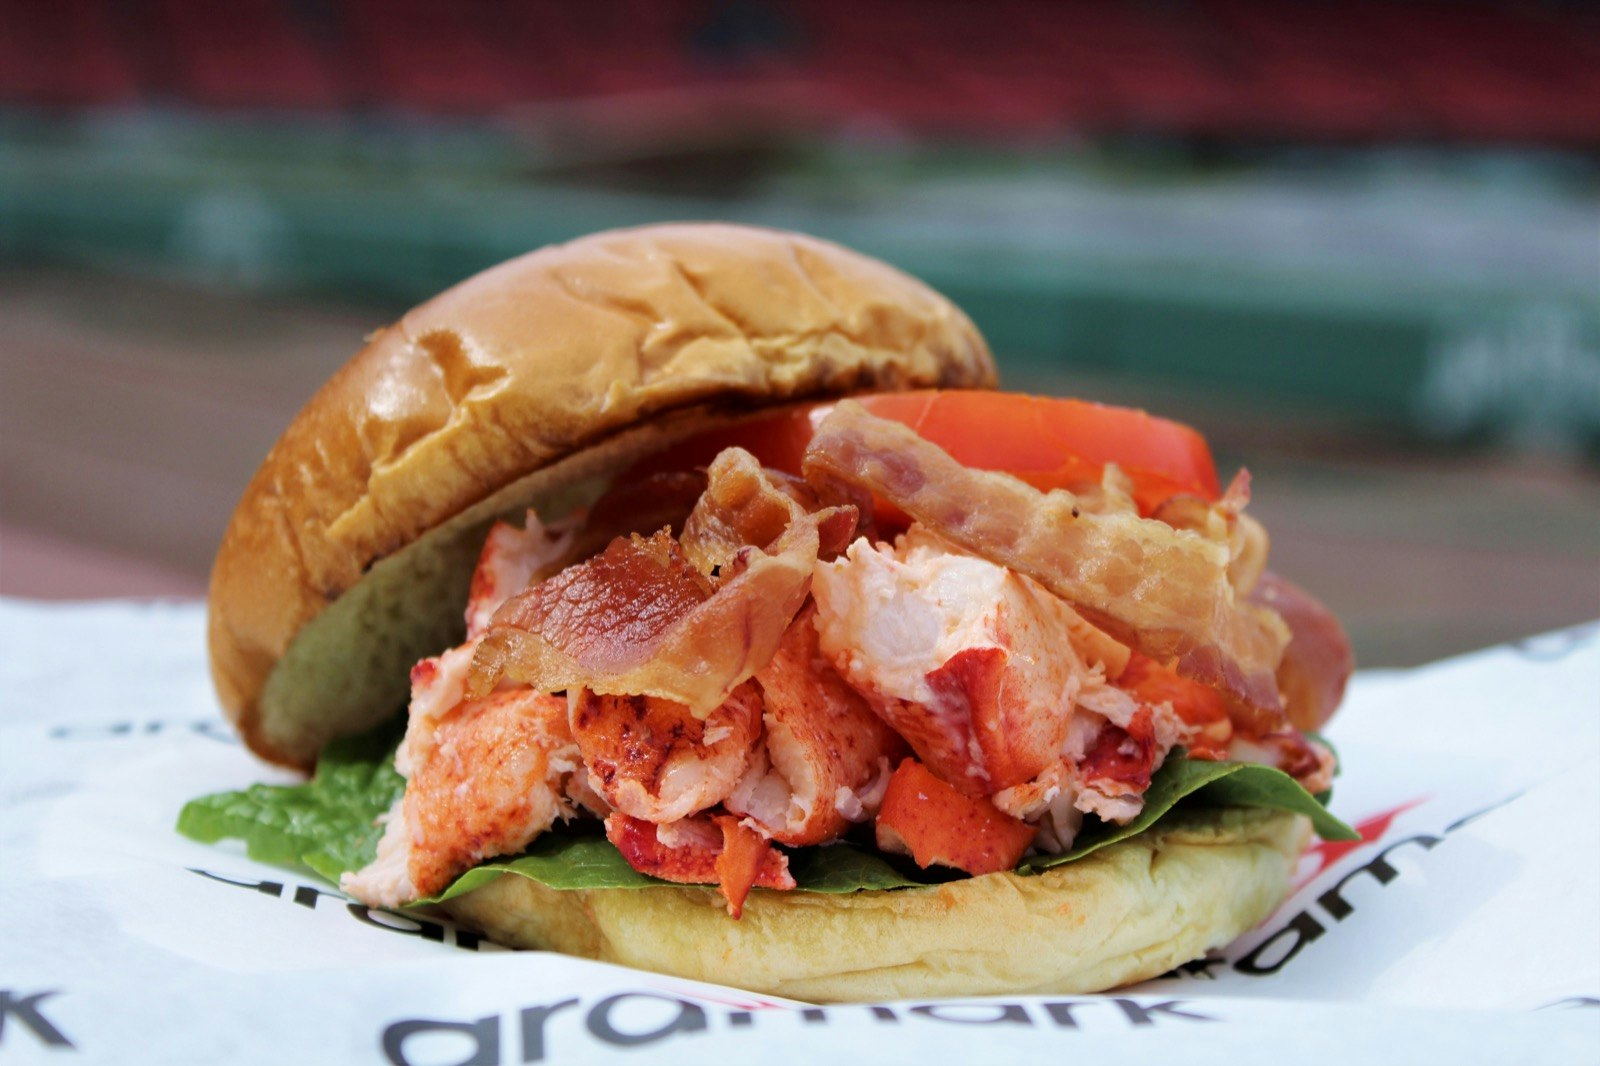 A lobster rolL BLT on a paper wrapper